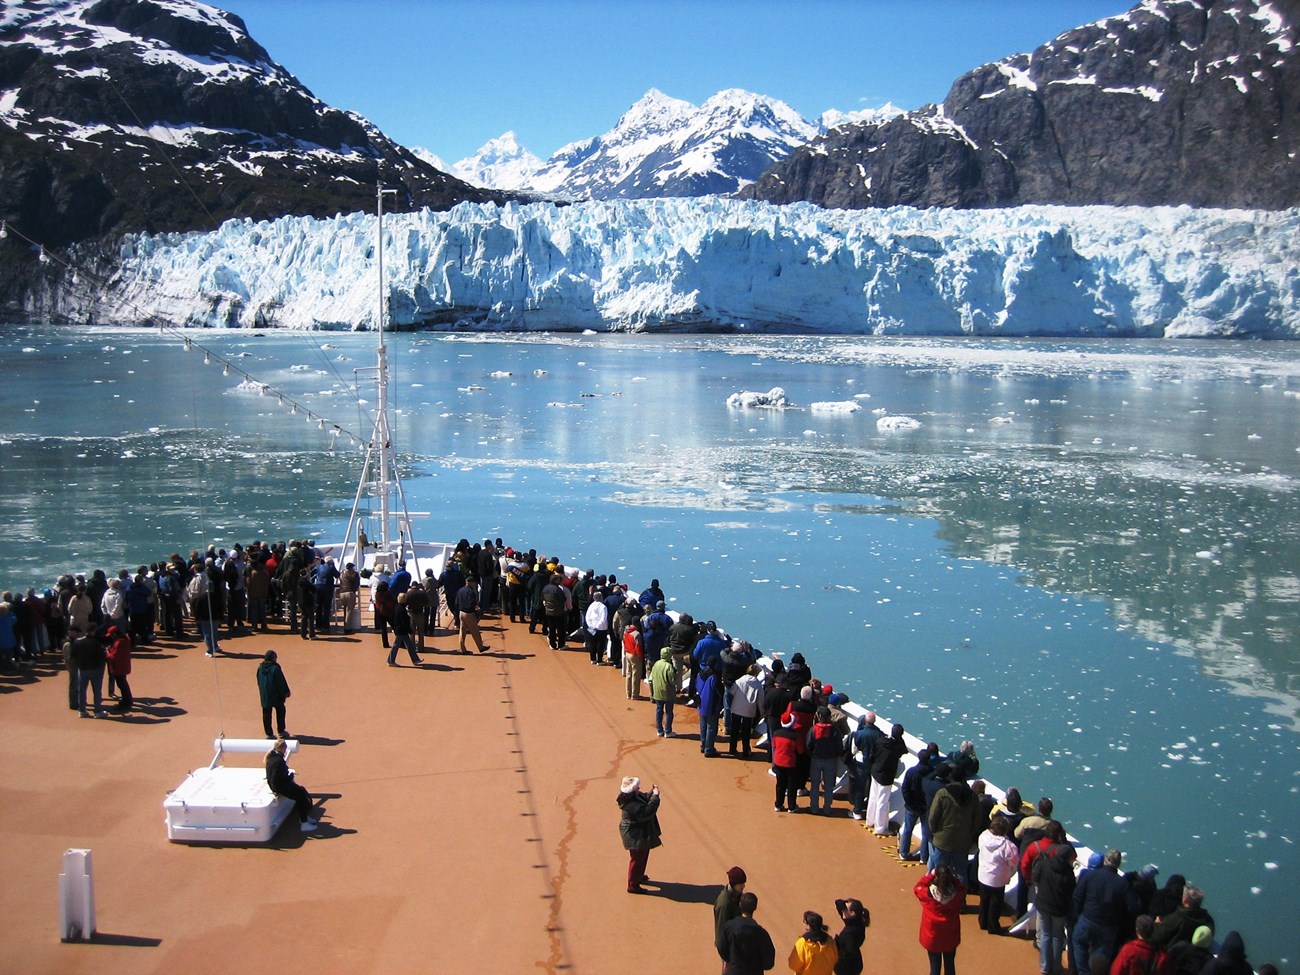 Visitors to Glacier bay national park gather at the bow of a cruise ship, overlooking the water